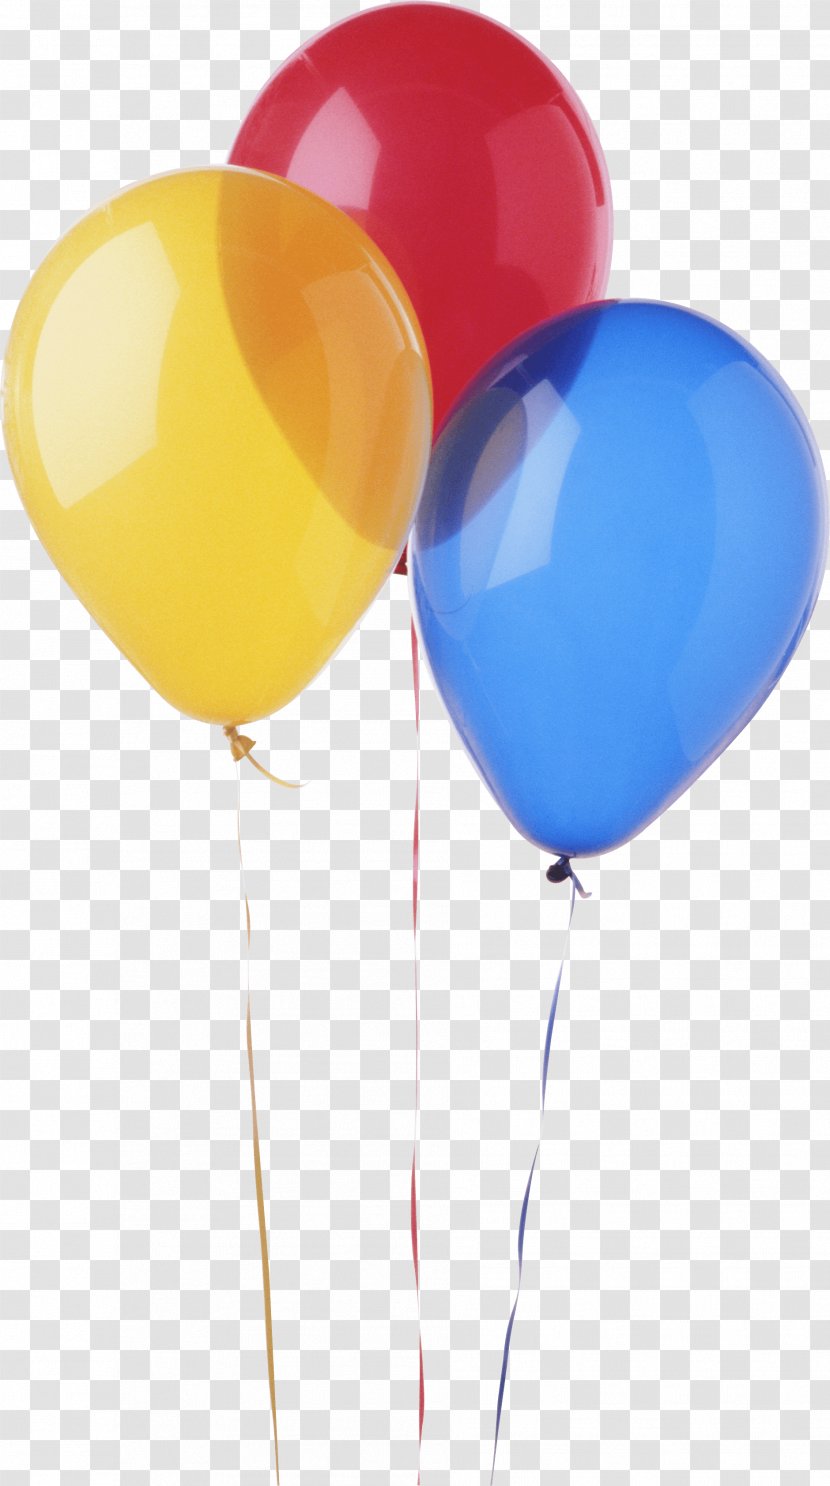 Balloon Clip Art - Party Supply - Balloons Image Transparent PNG